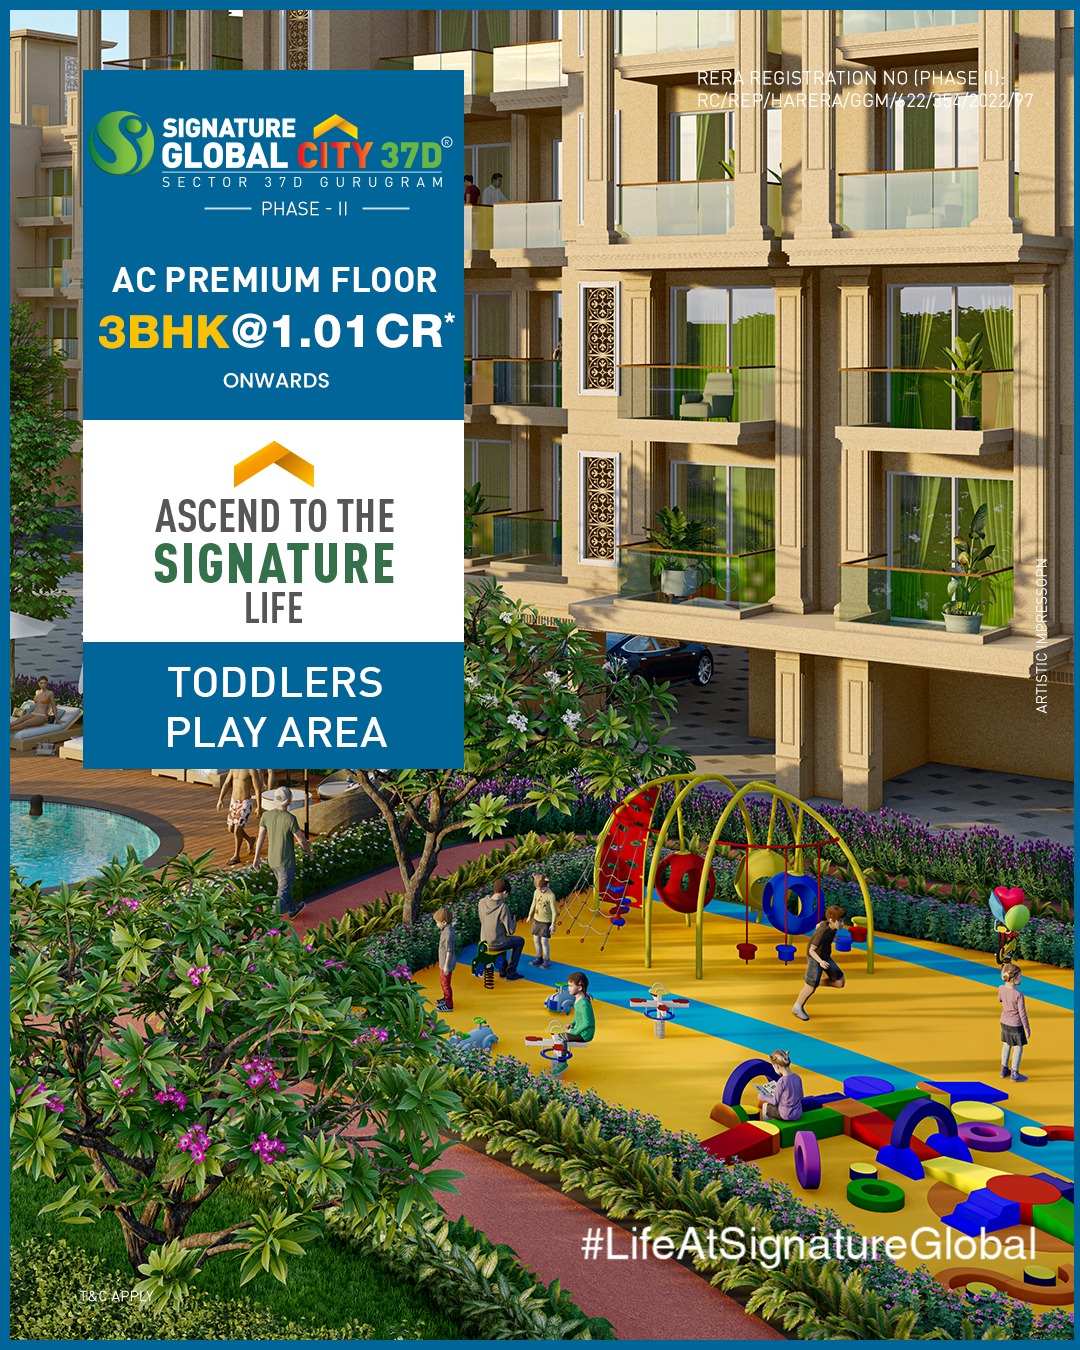 Toddlers play area at Signature Global City 37D, Gurgaon Update